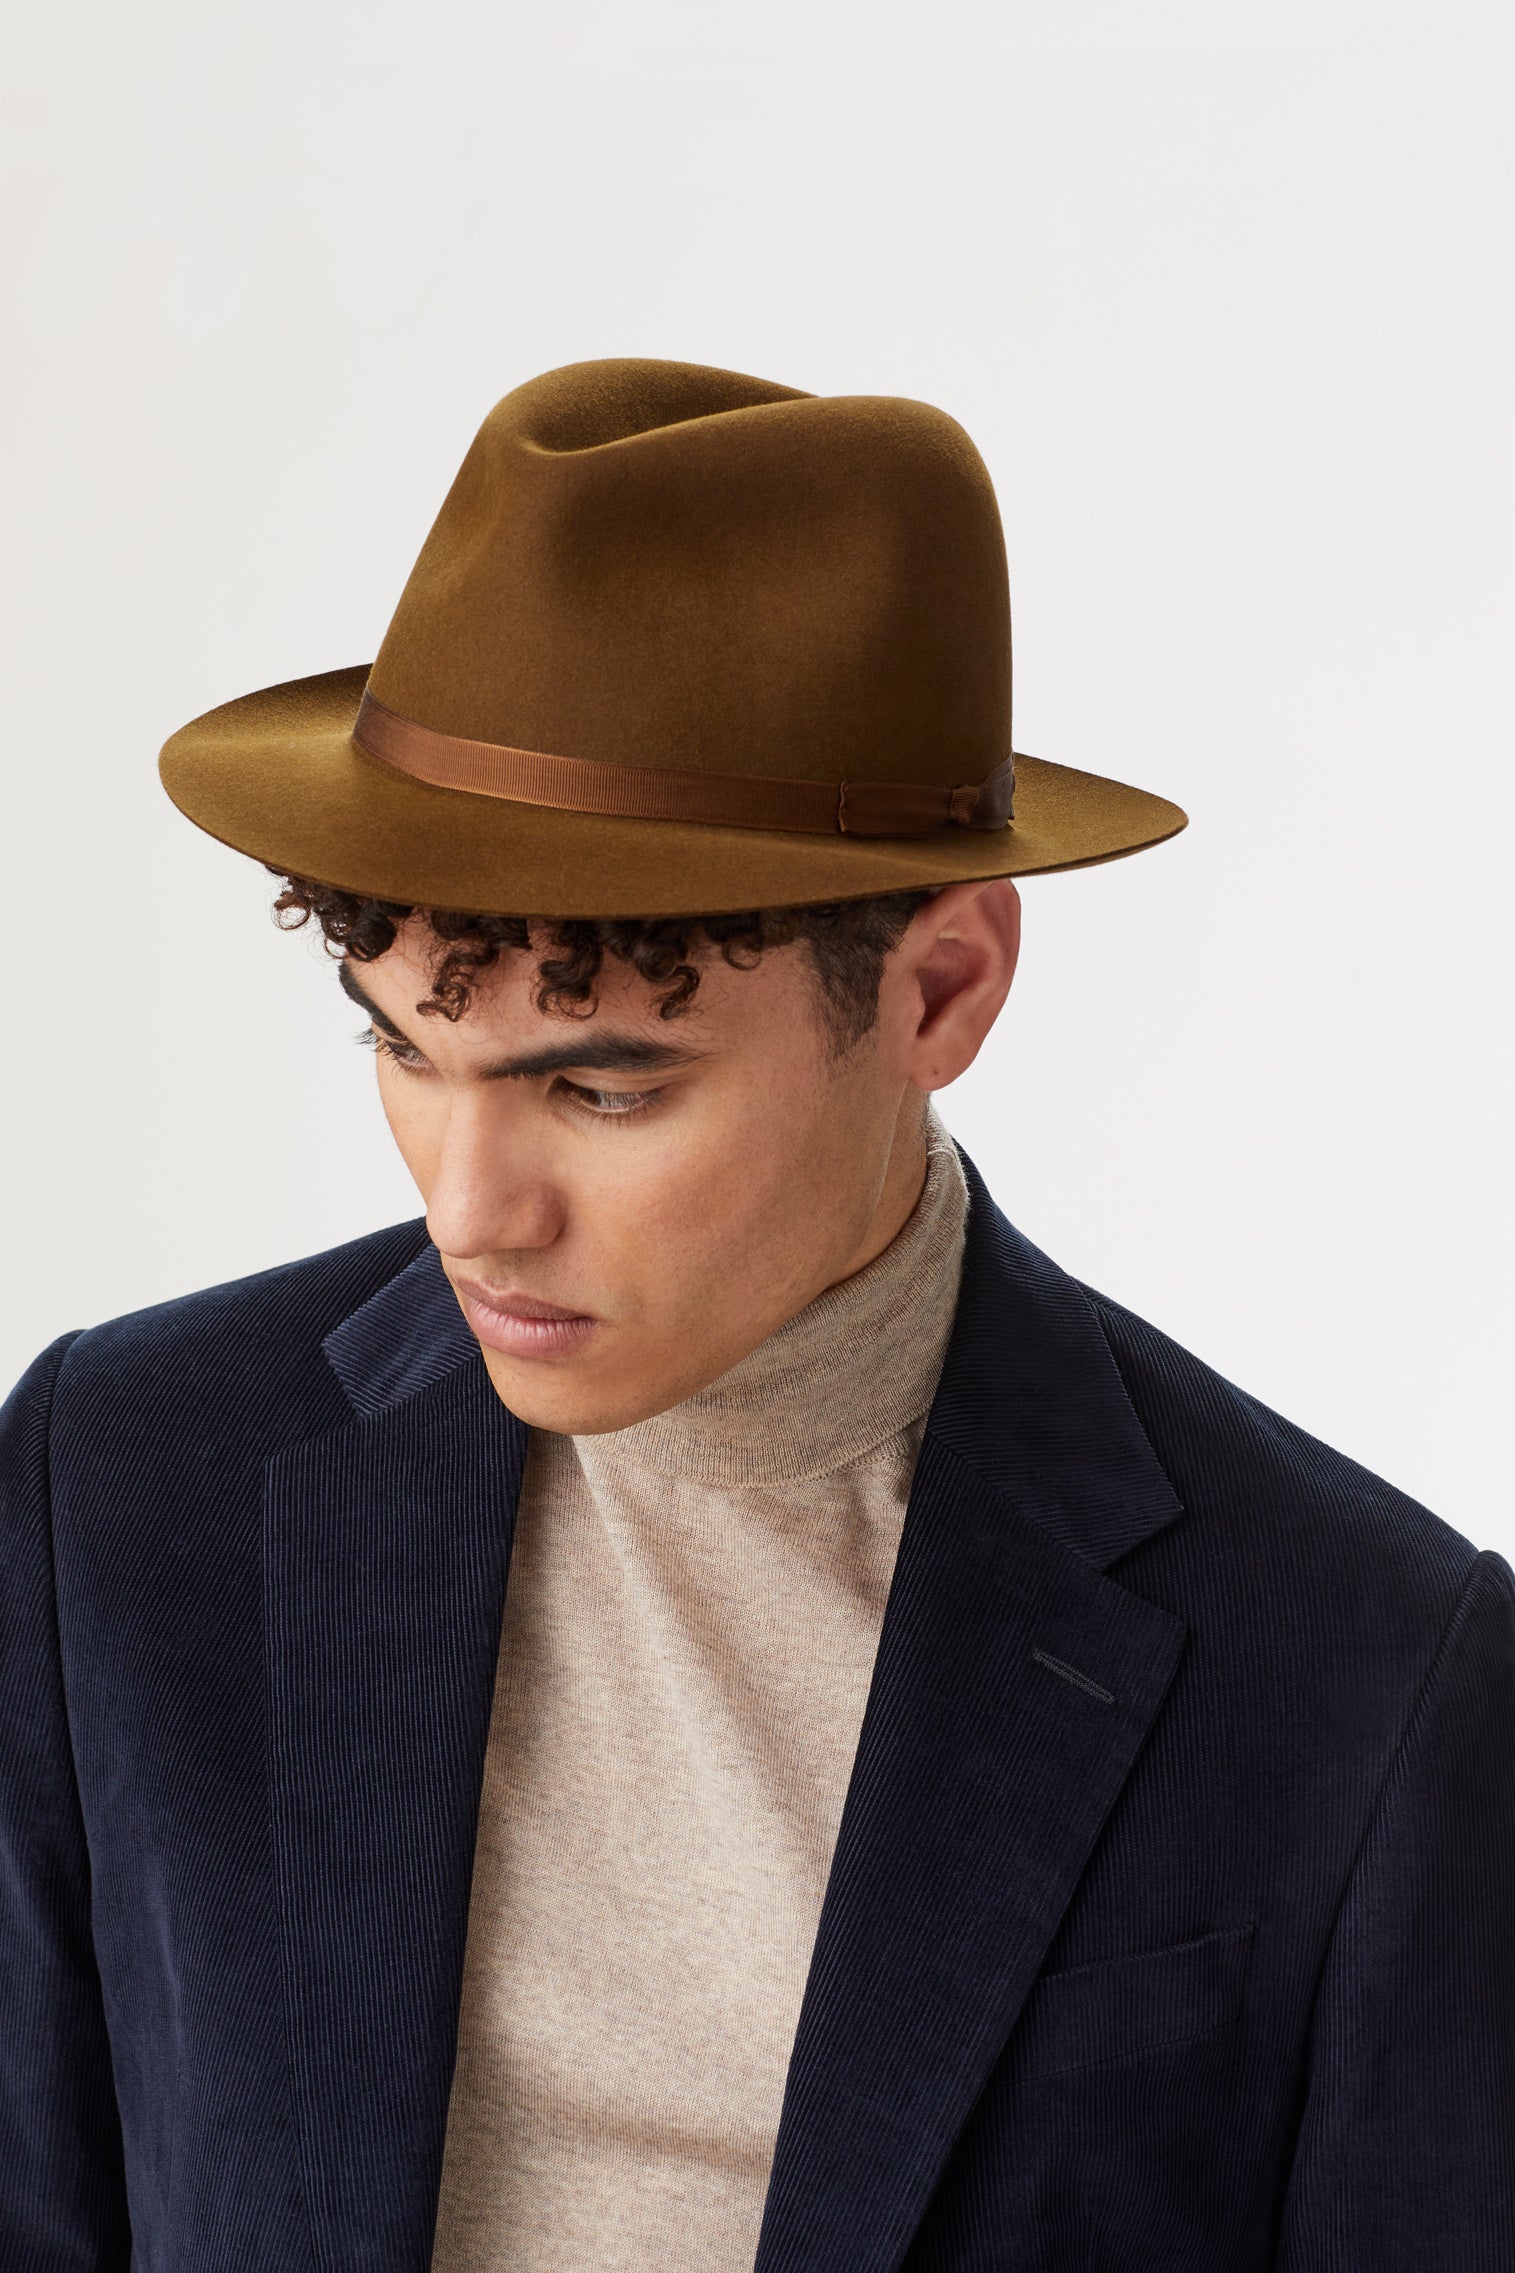 Voyager Rollable Trilby - Trilbies, Porkpie Hats & Cloches - Lock & Co. Hatters London UK